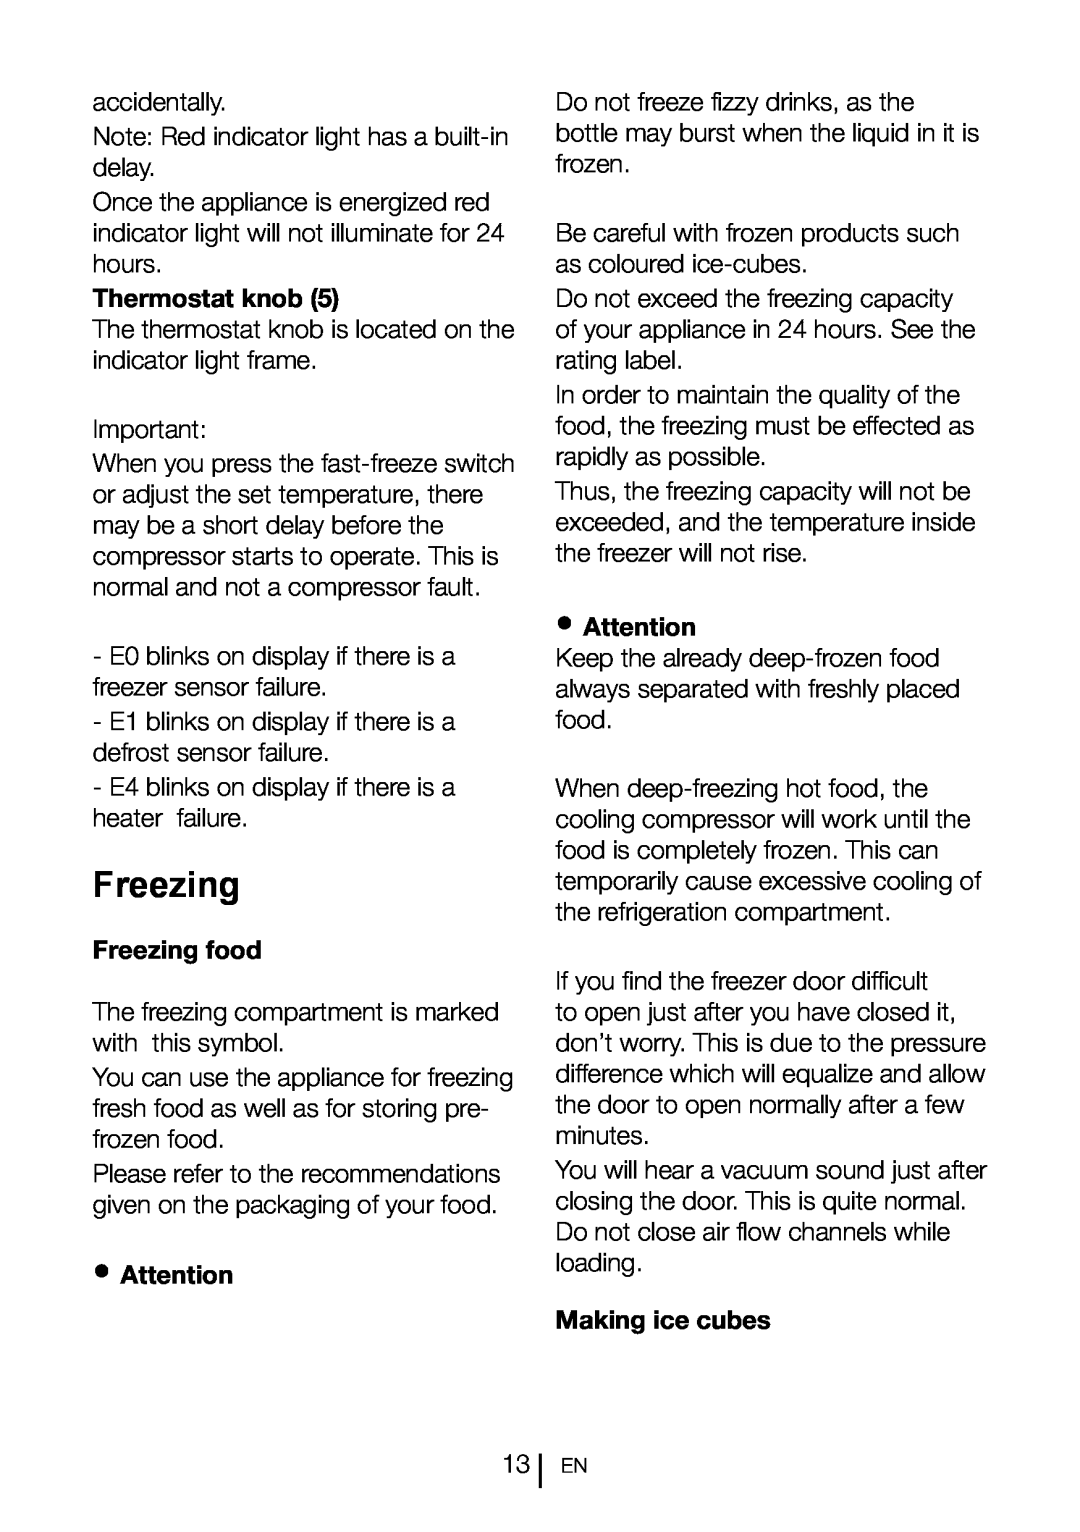 Smeg CV260PNF instruction manual Thermostat knob, Freezing food, •Attention, Making ice cubes 